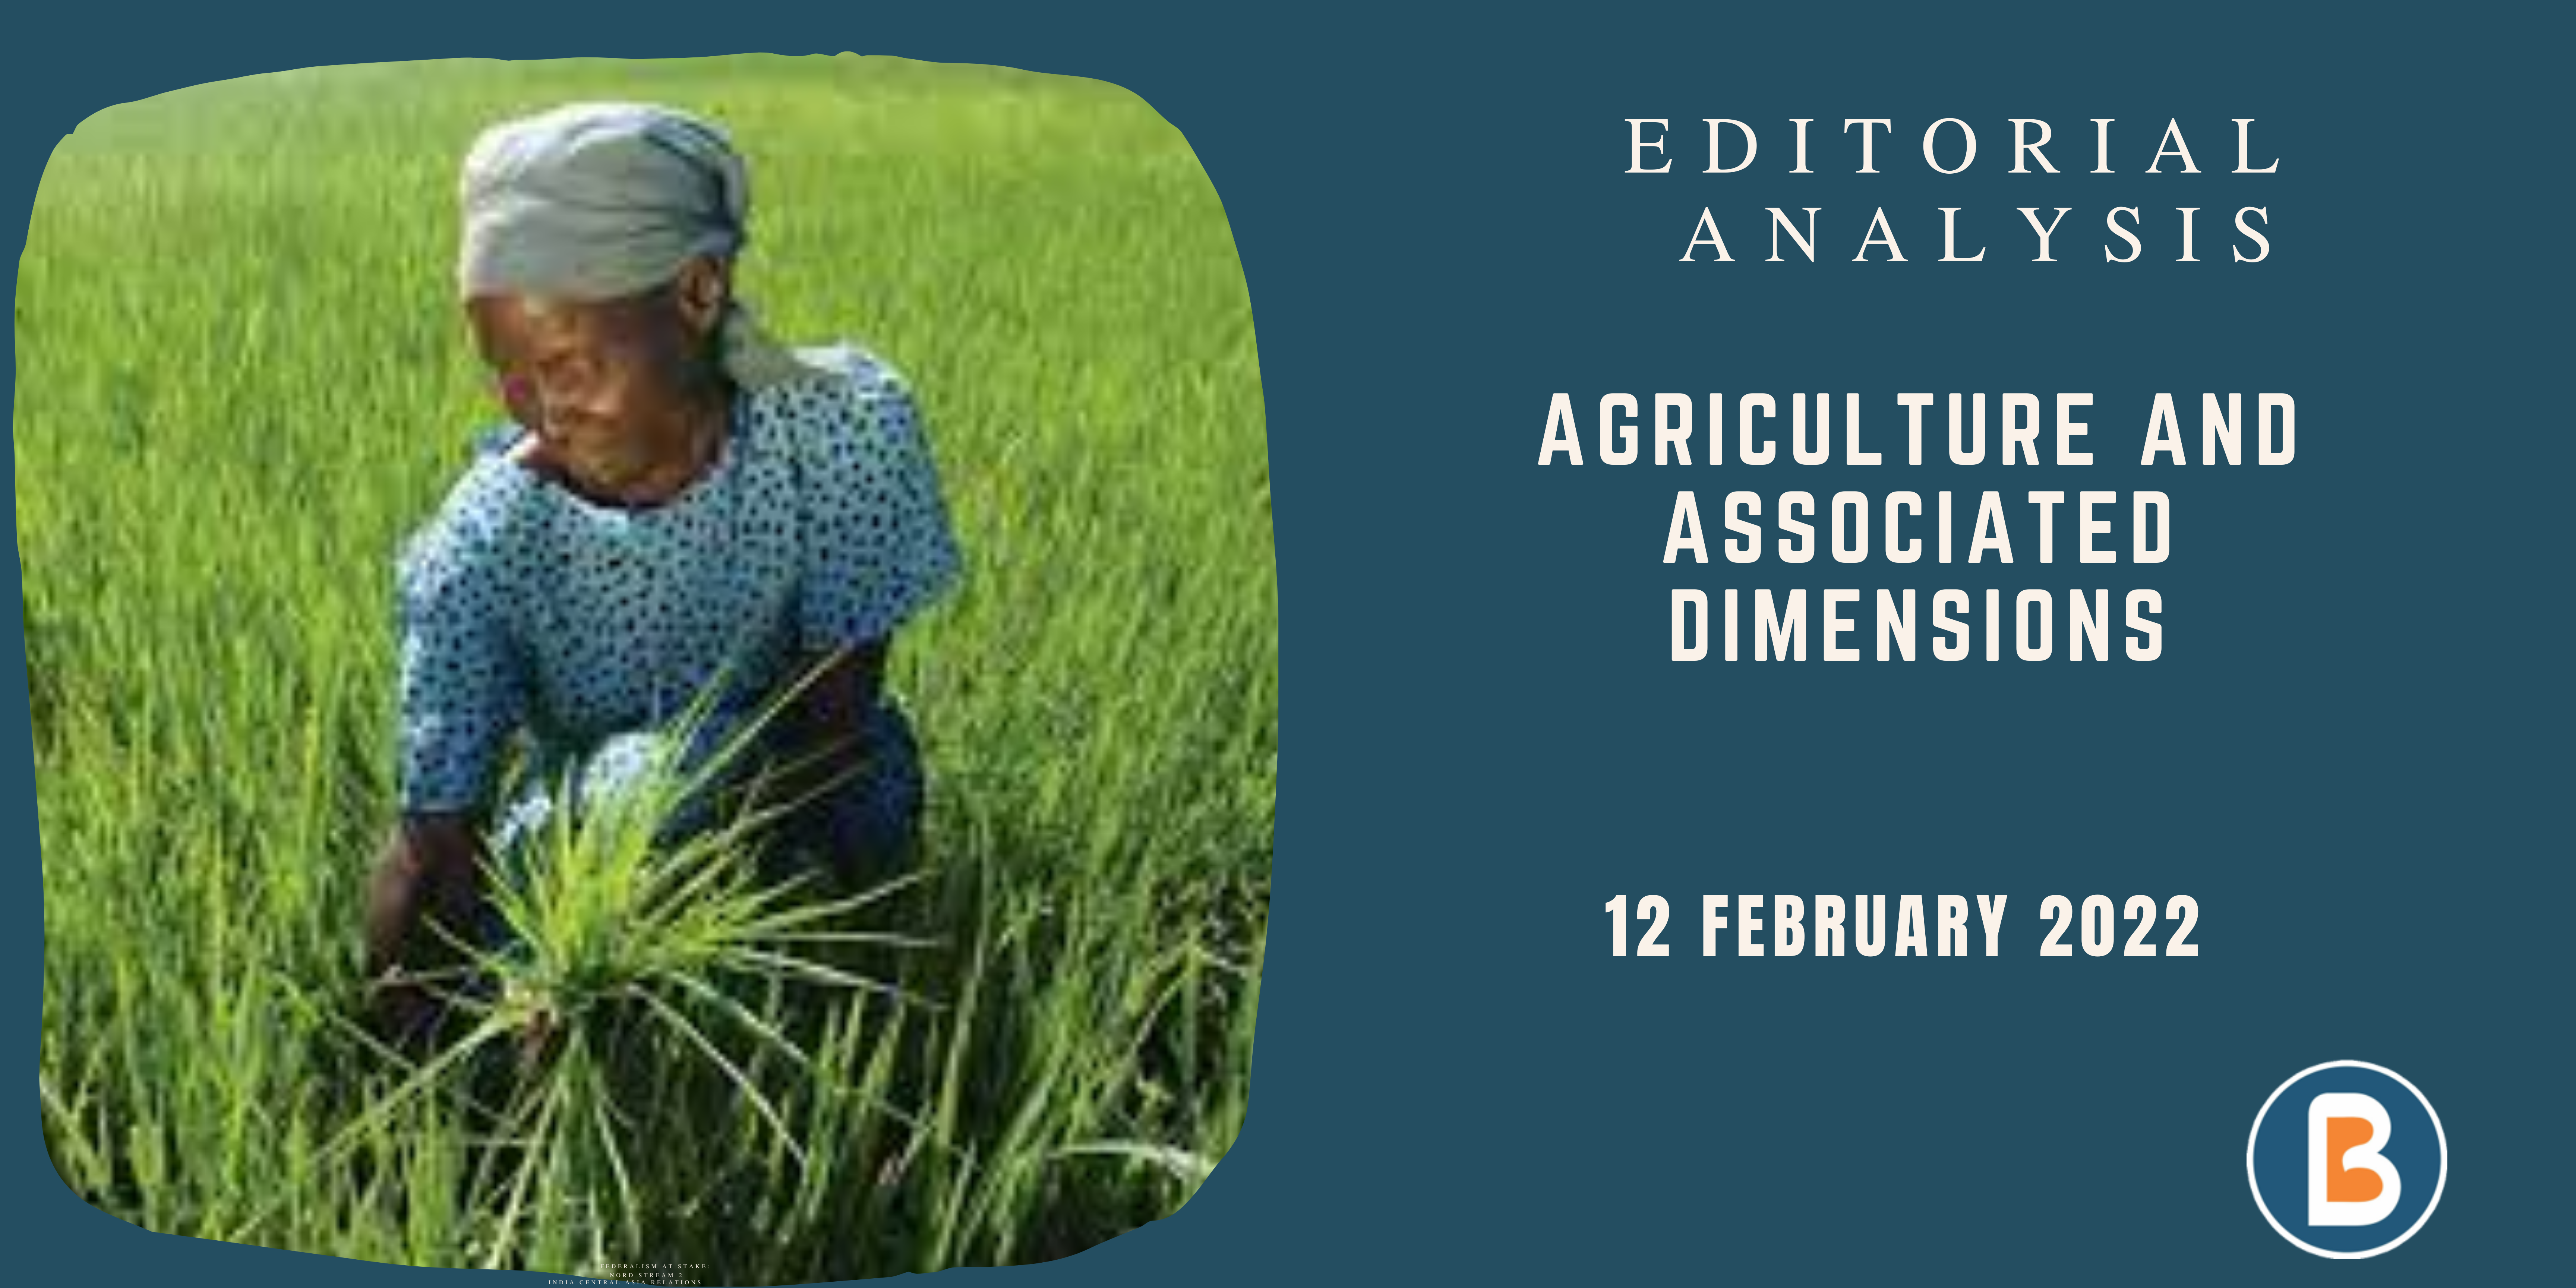 Editorial Analysis for UPSC - Agriculture and Associated Dimensions